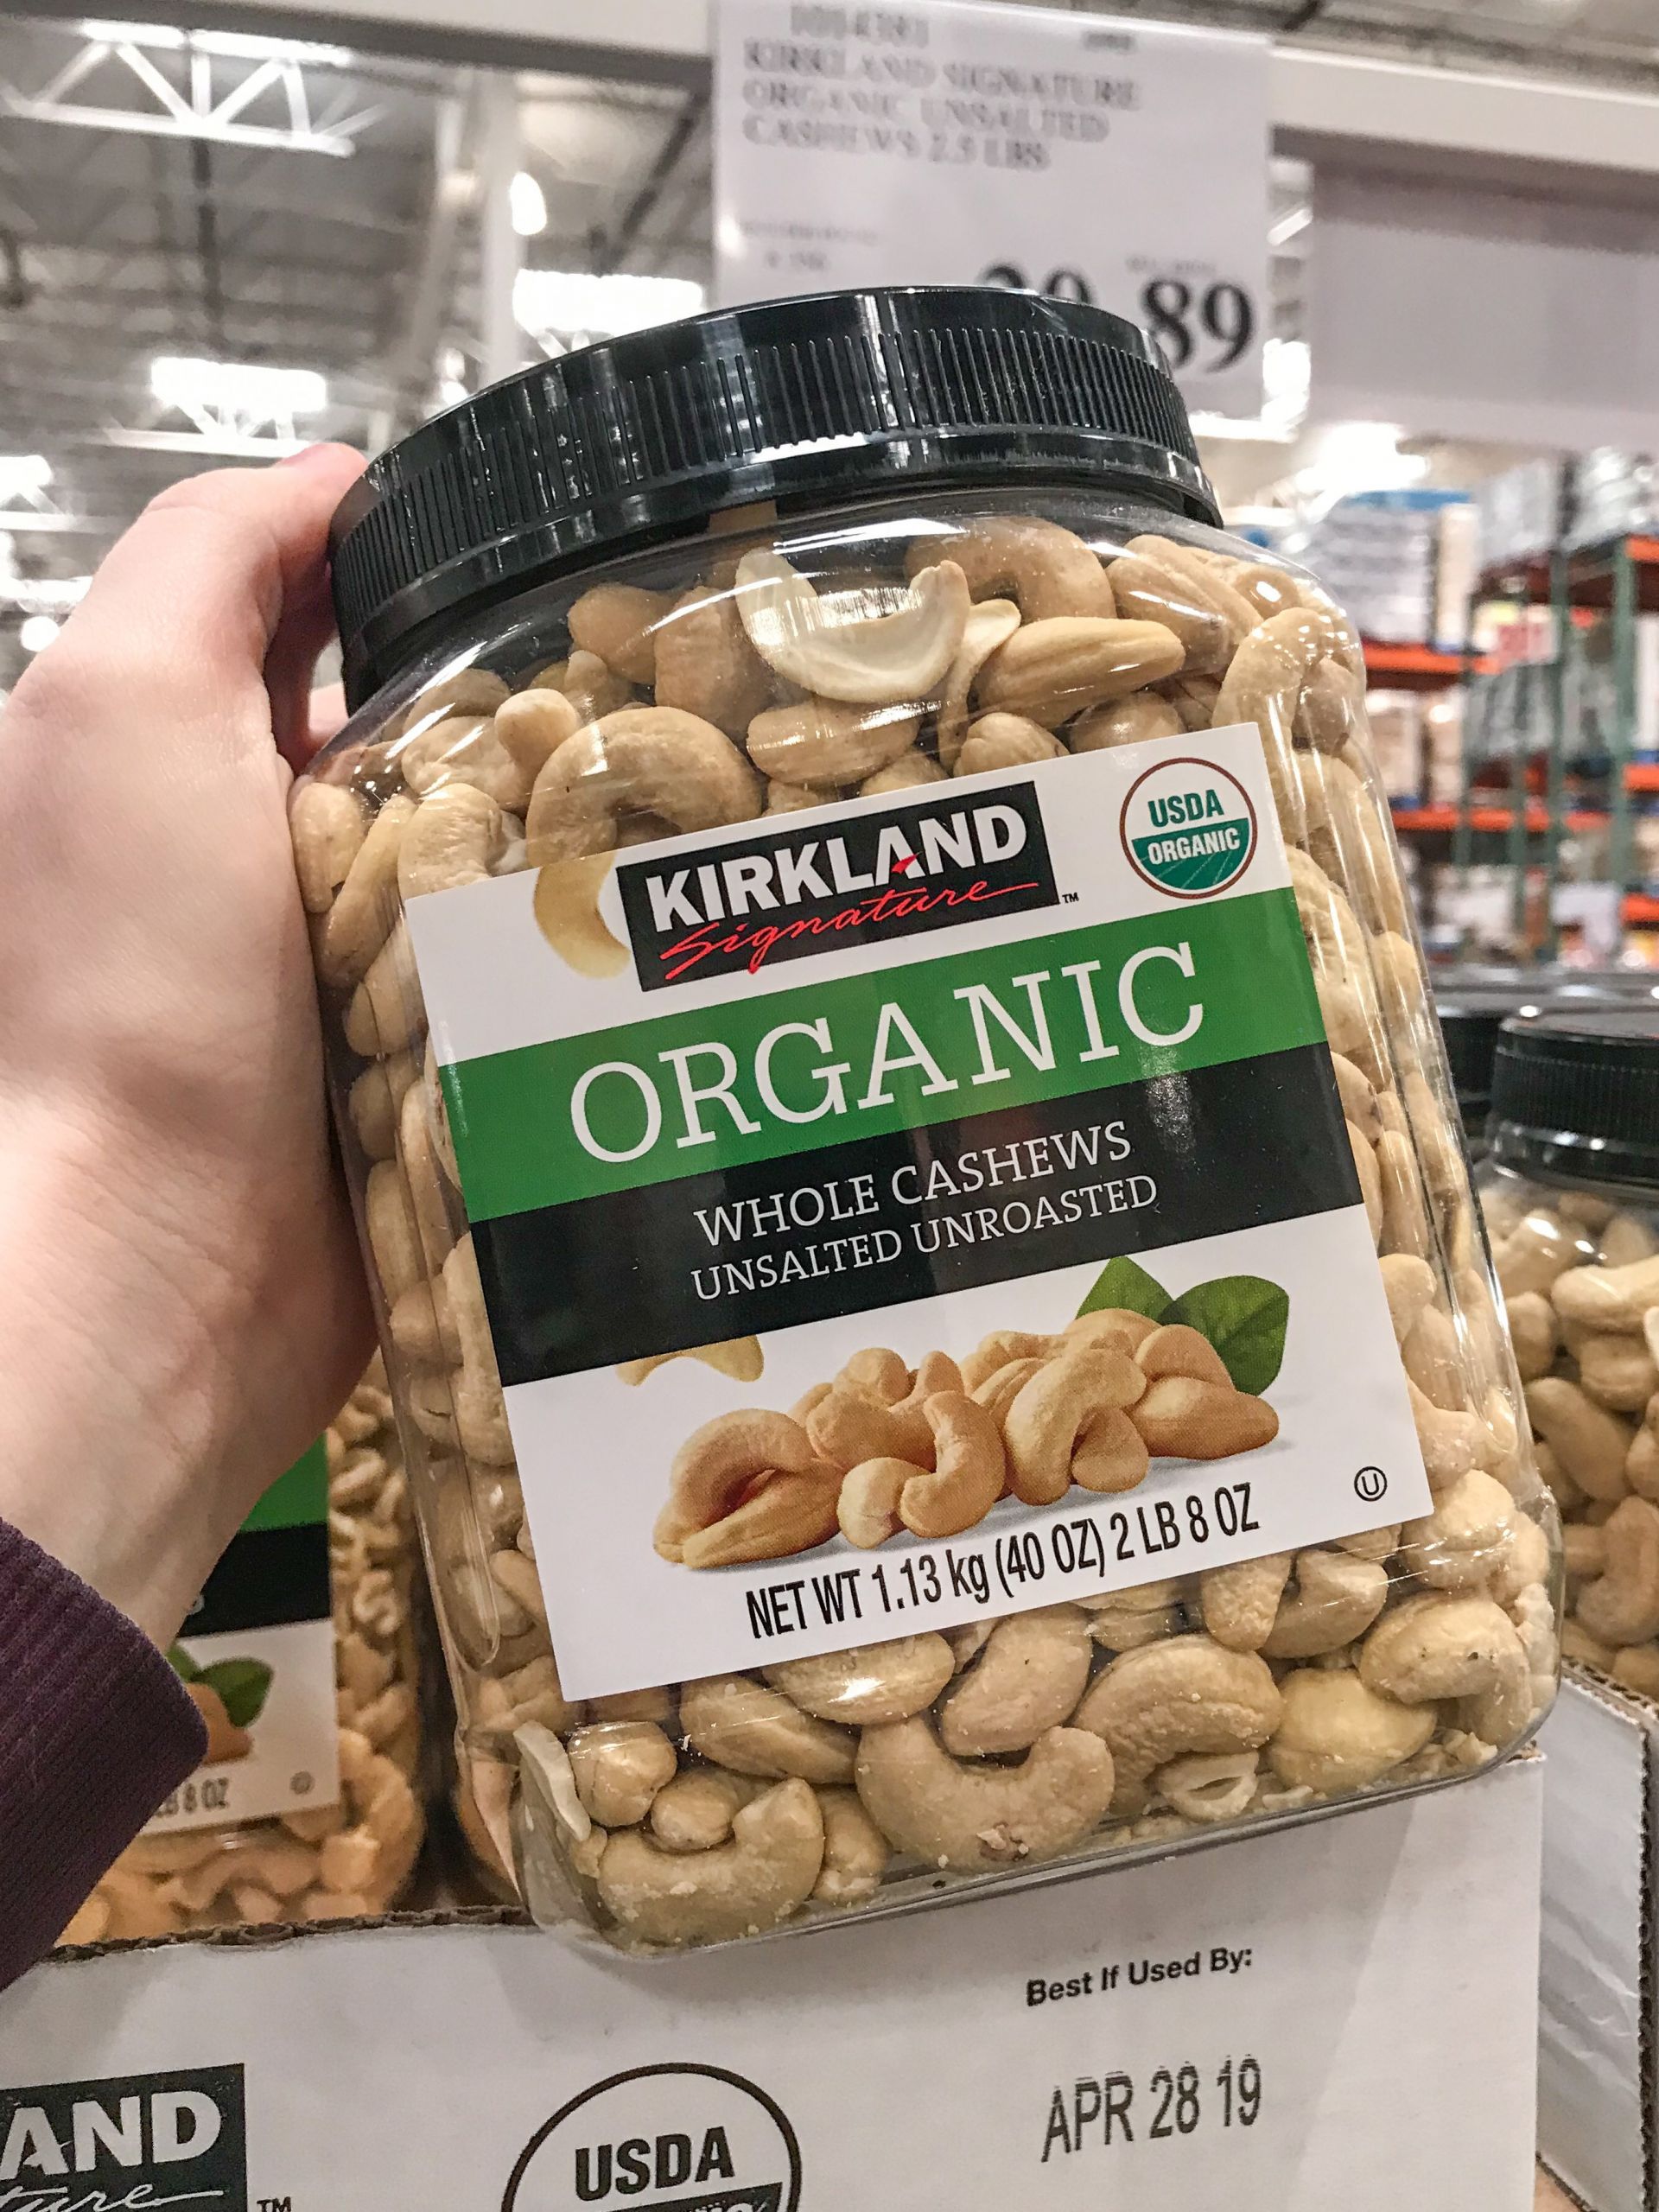 Best Healthy Snacks To Buy
 10 Best Healthy ish Snacks to Buy at Costco Project